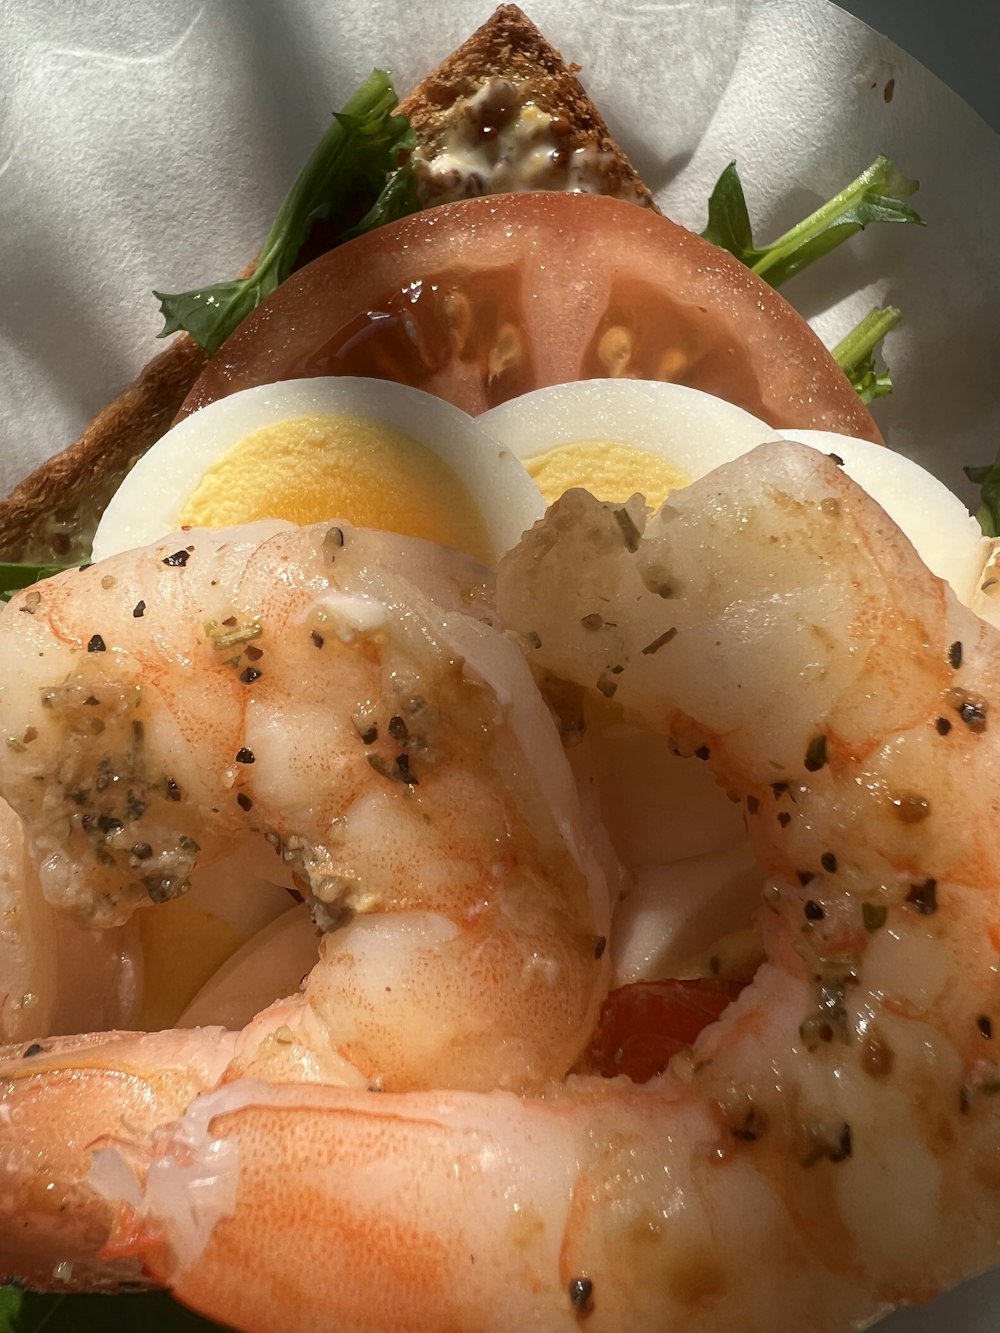 a close up of a plate of food with shrimp